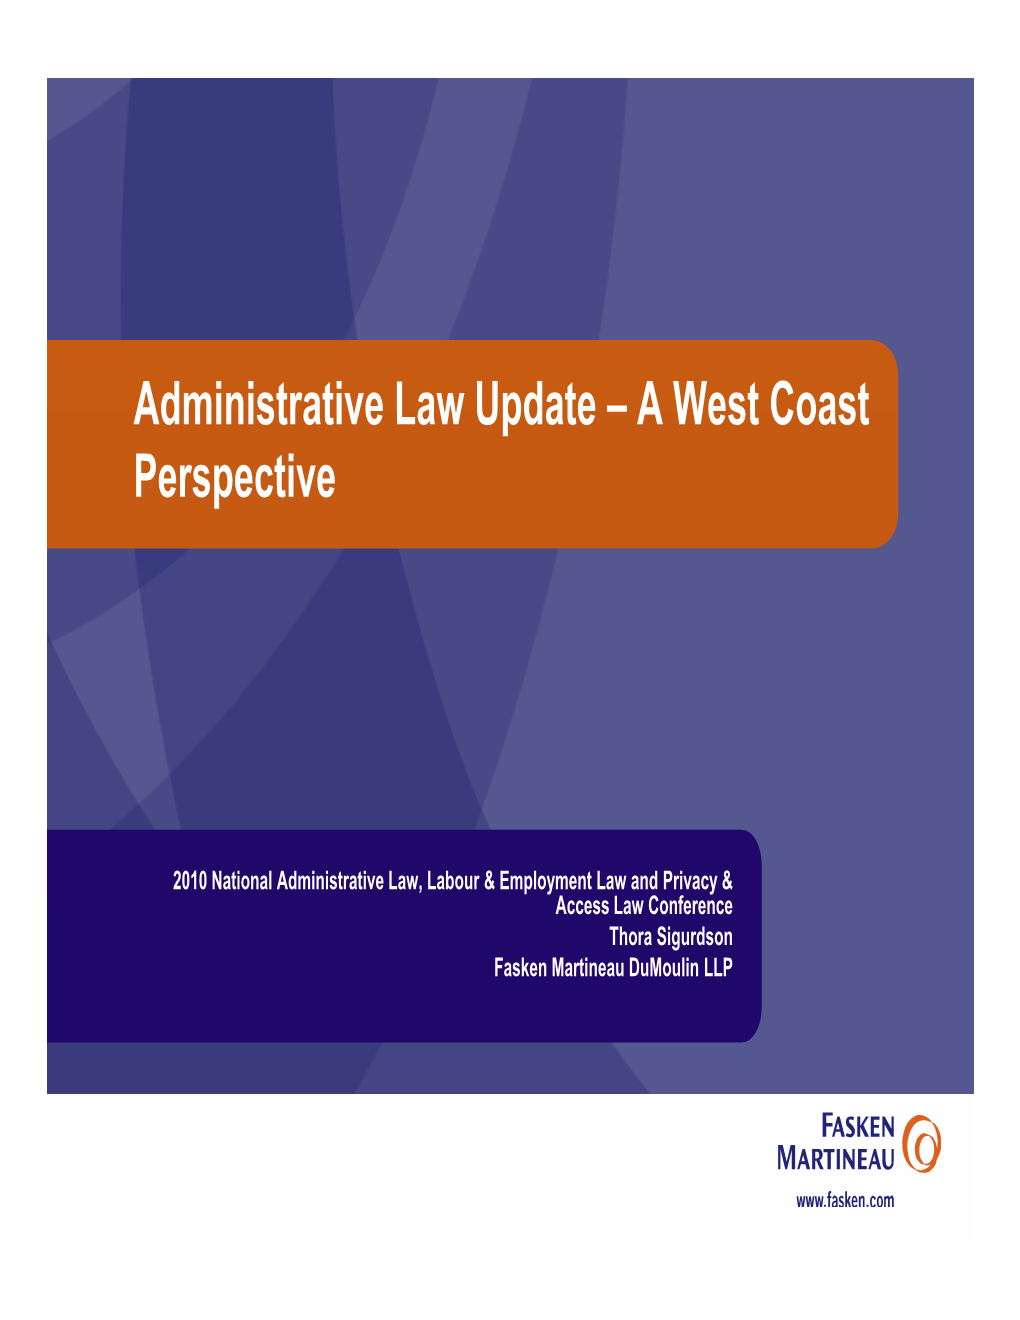 Administrative Law Update – a West Coast Perspective